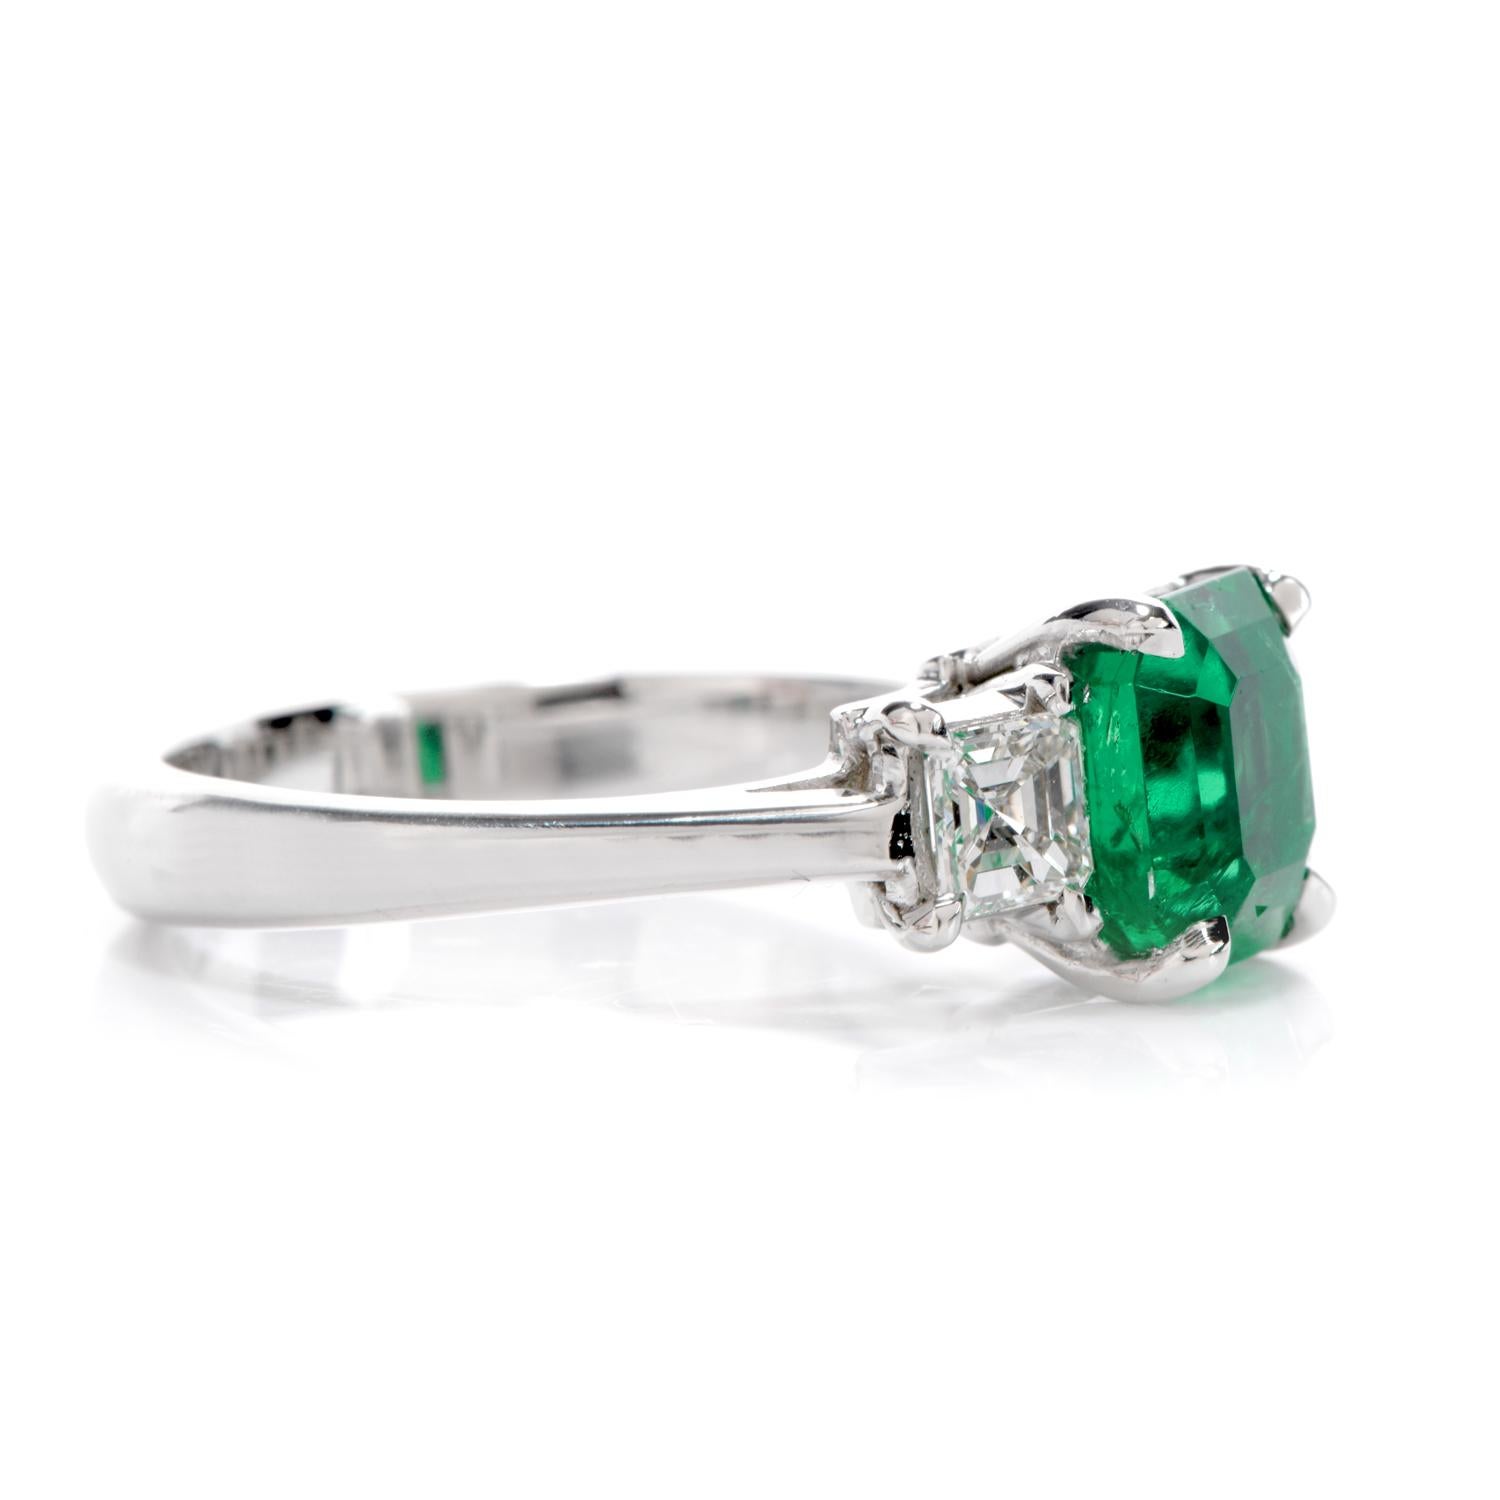 Let this glowing Colombian Emerald Platinum ring steal your breath away with its striking hue! 
This 1.41 carat center stone is accompanied by two crisp Asscher cut diamonds totaling 0.50 carats, E-F Color VVS clarity.. 
The classic three-stone